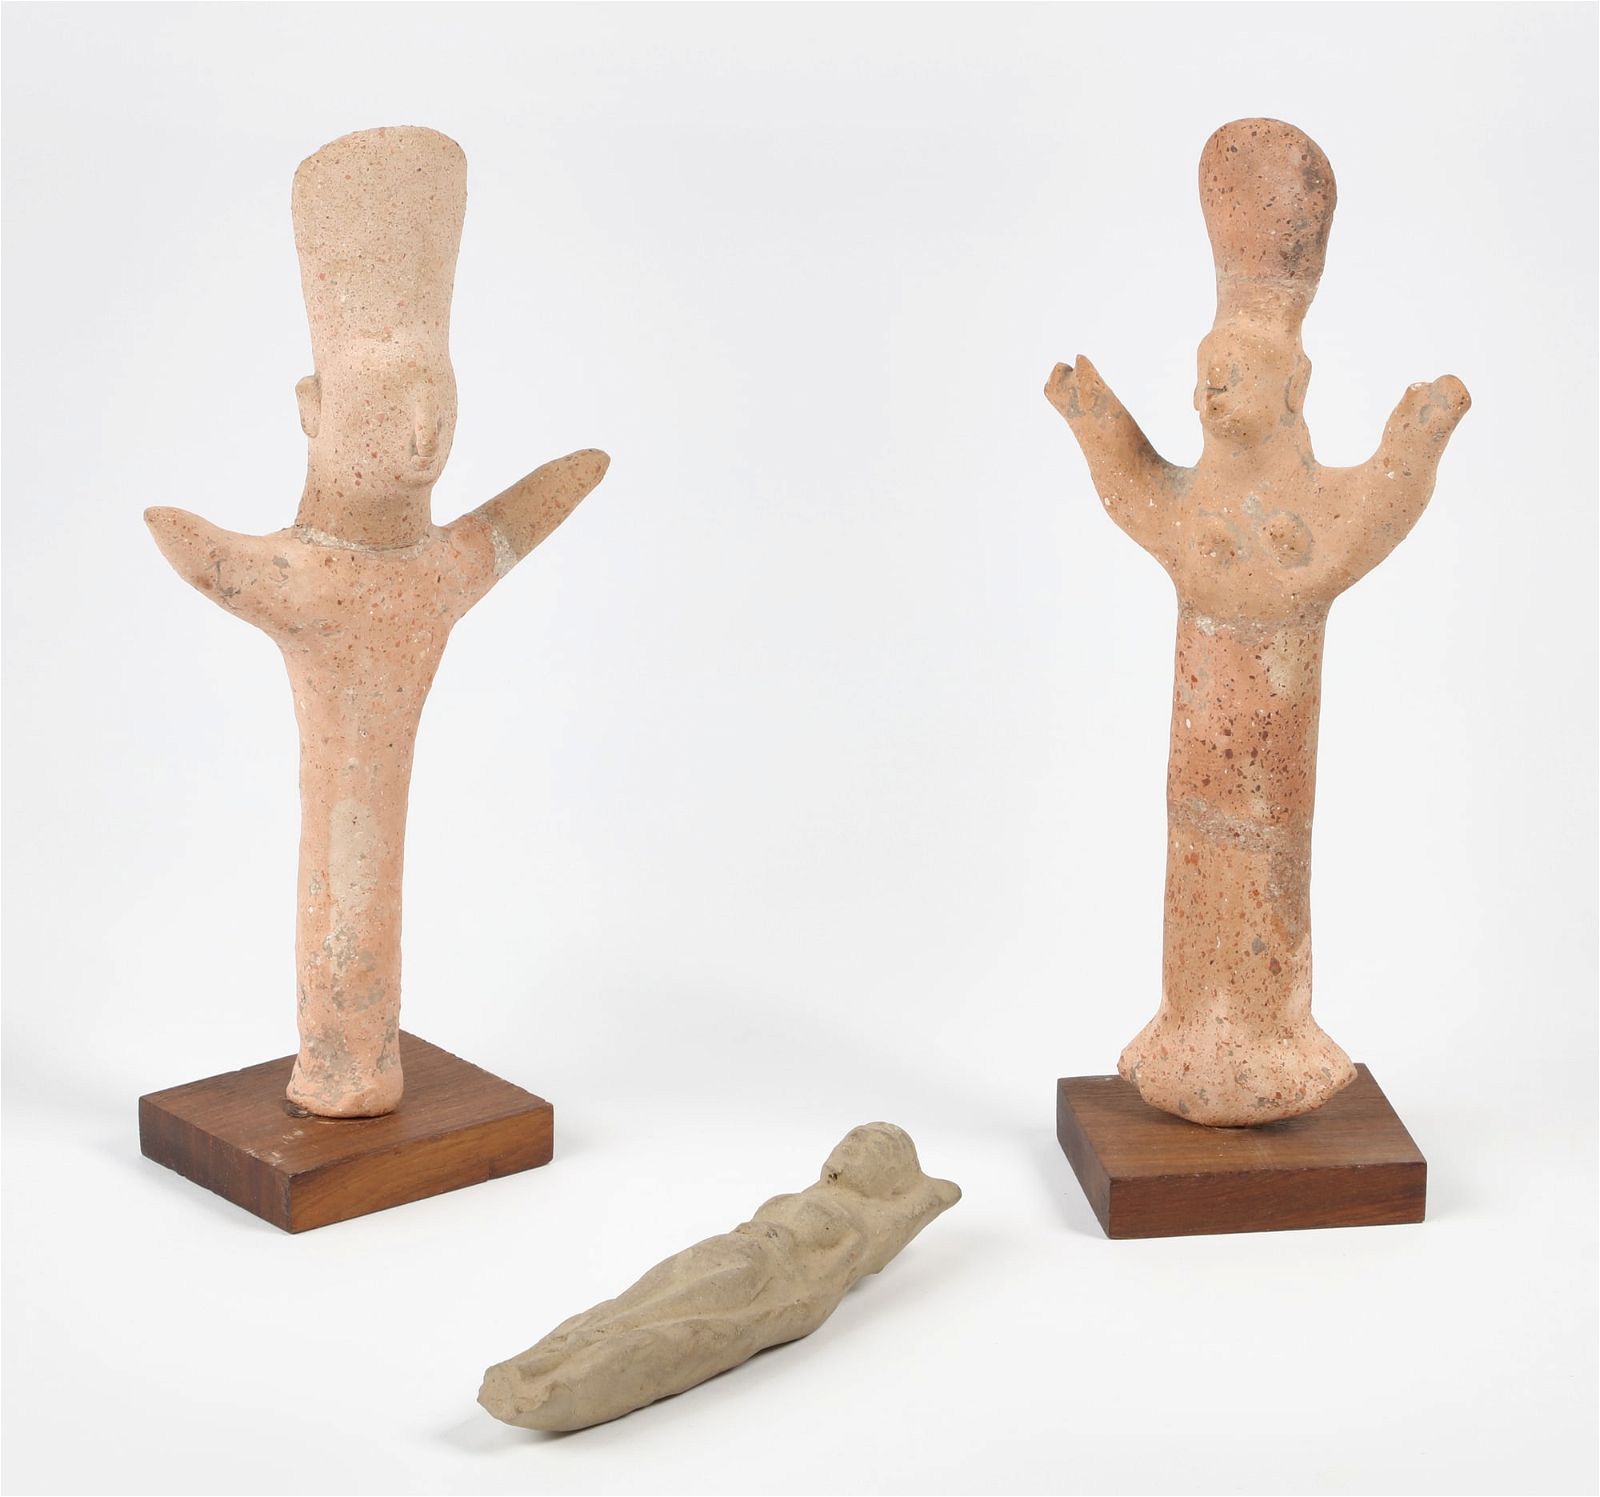 POTTERY FIGURES, POSSIBLY CYPRIOT